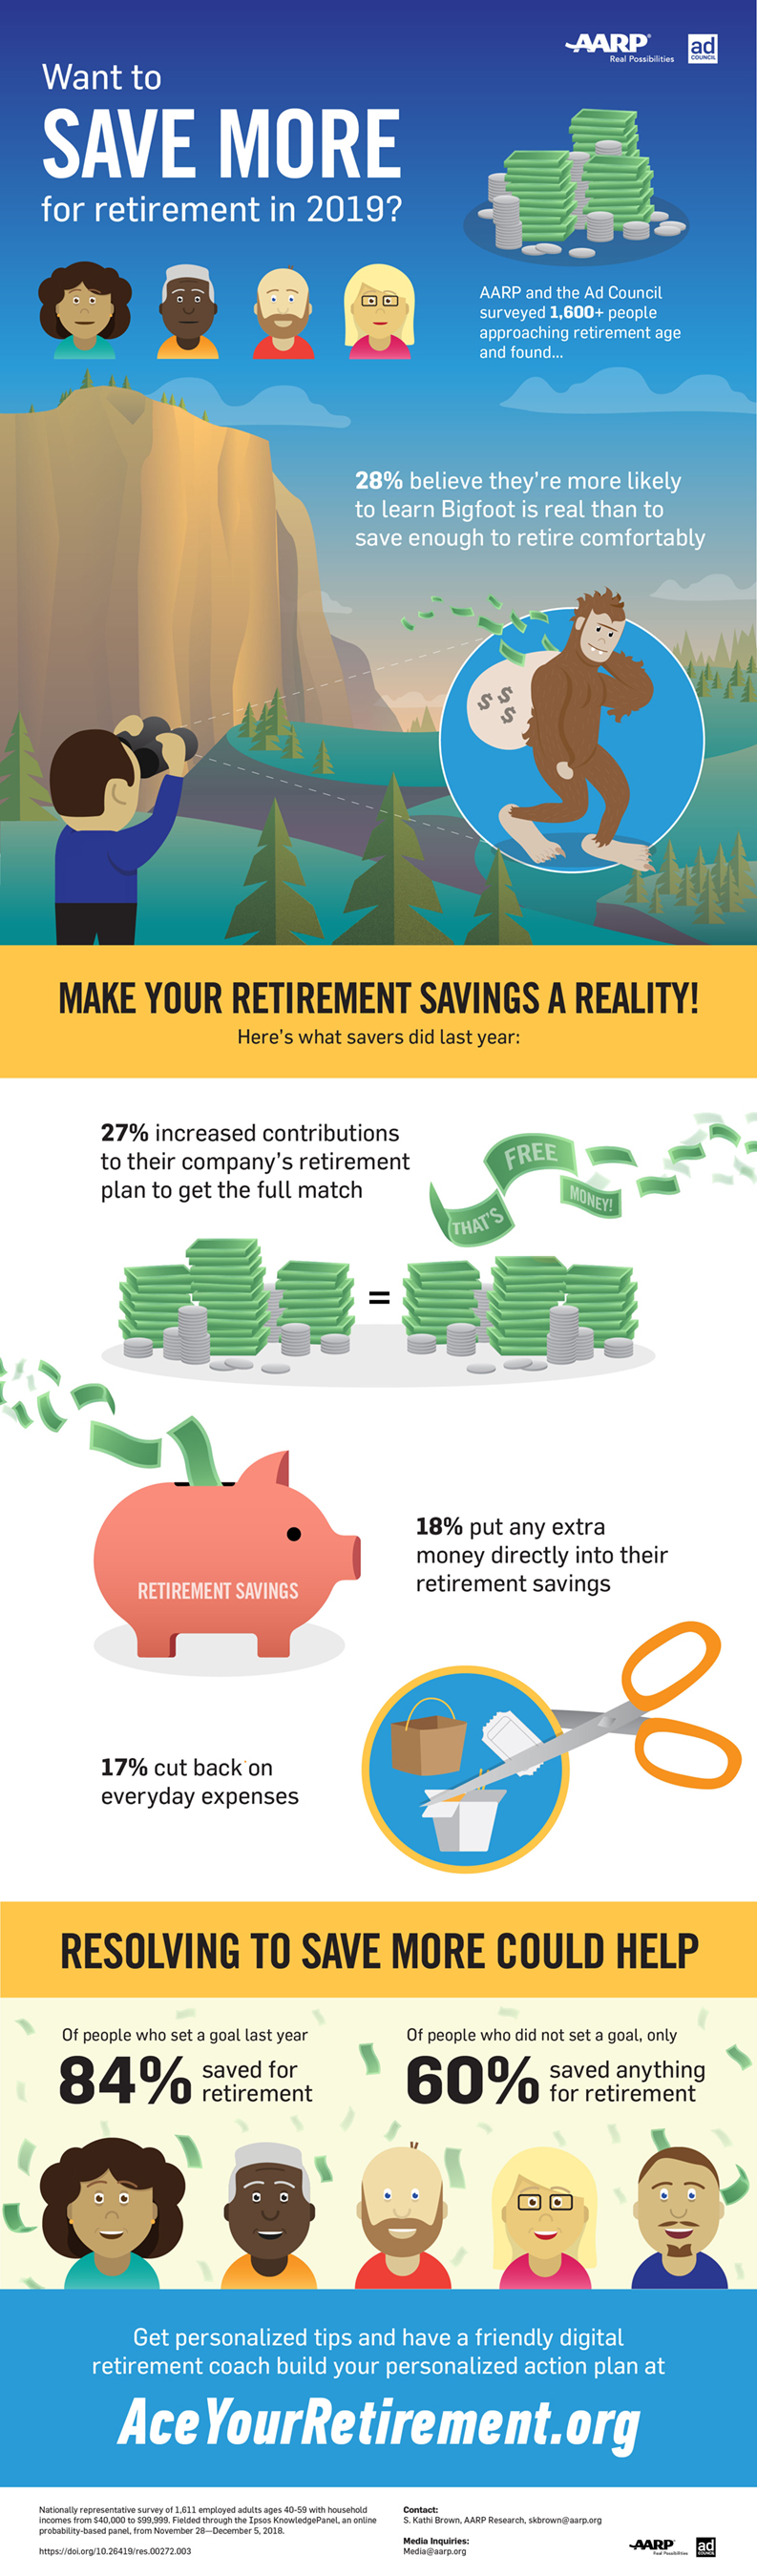 Want to save more for retirement in 2019?